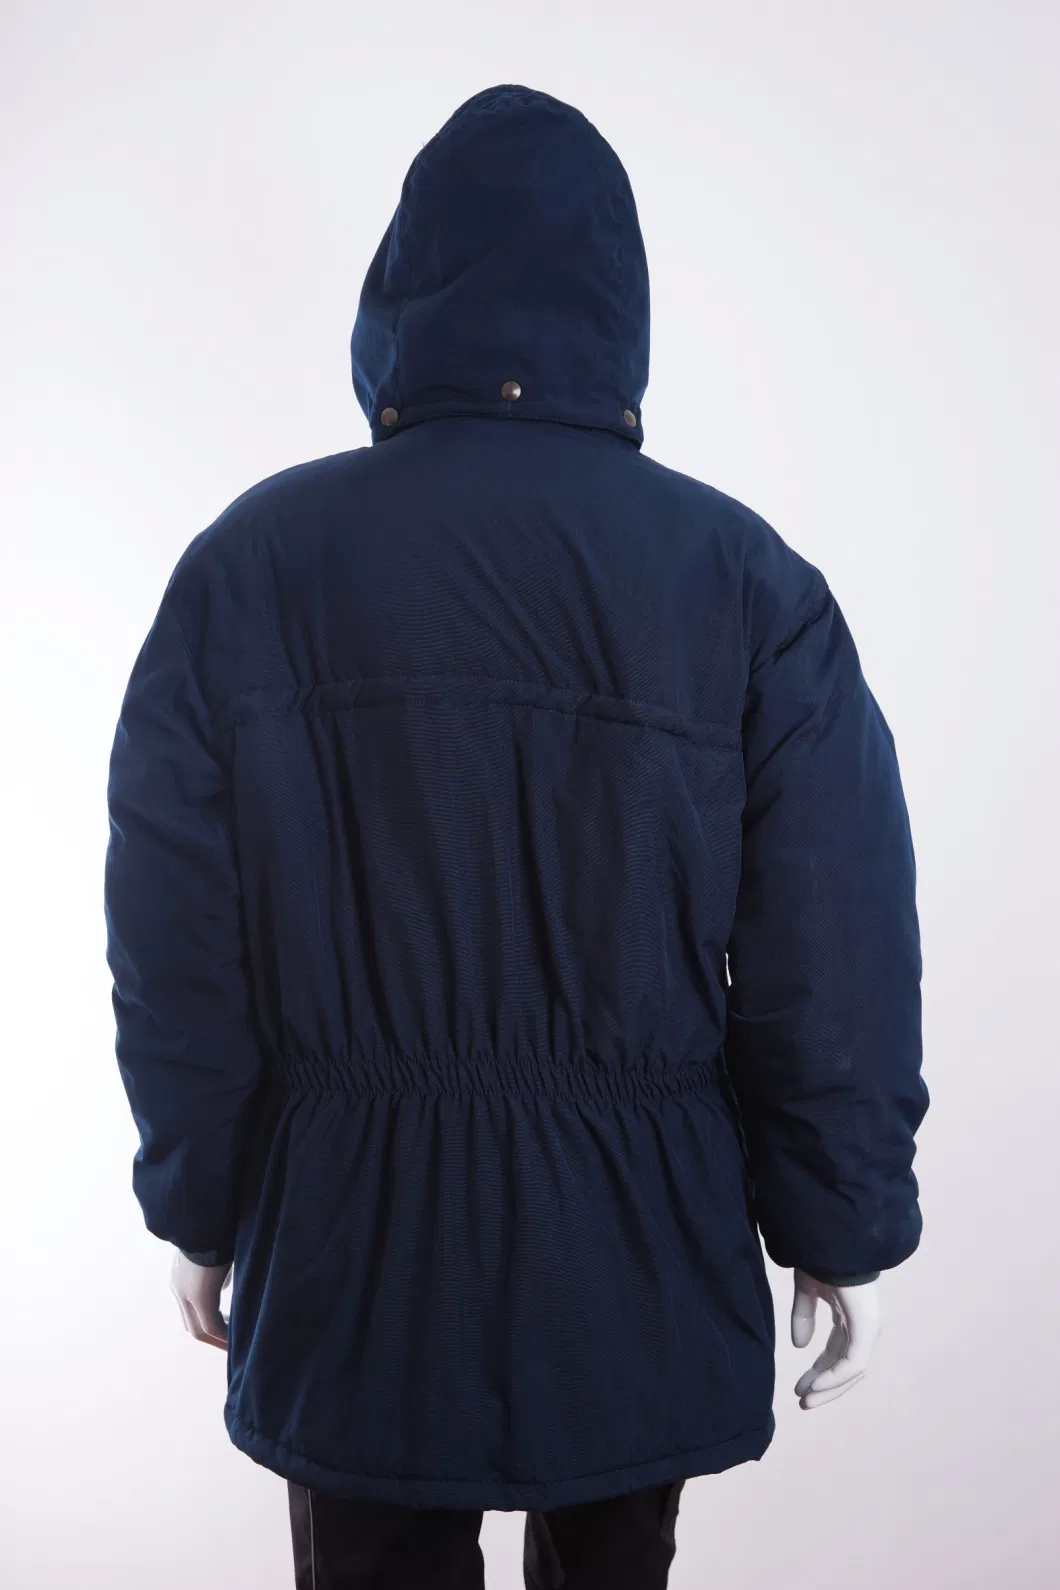 Security Police Uniform Causal Windproof Winter Jacket for Cold Protection